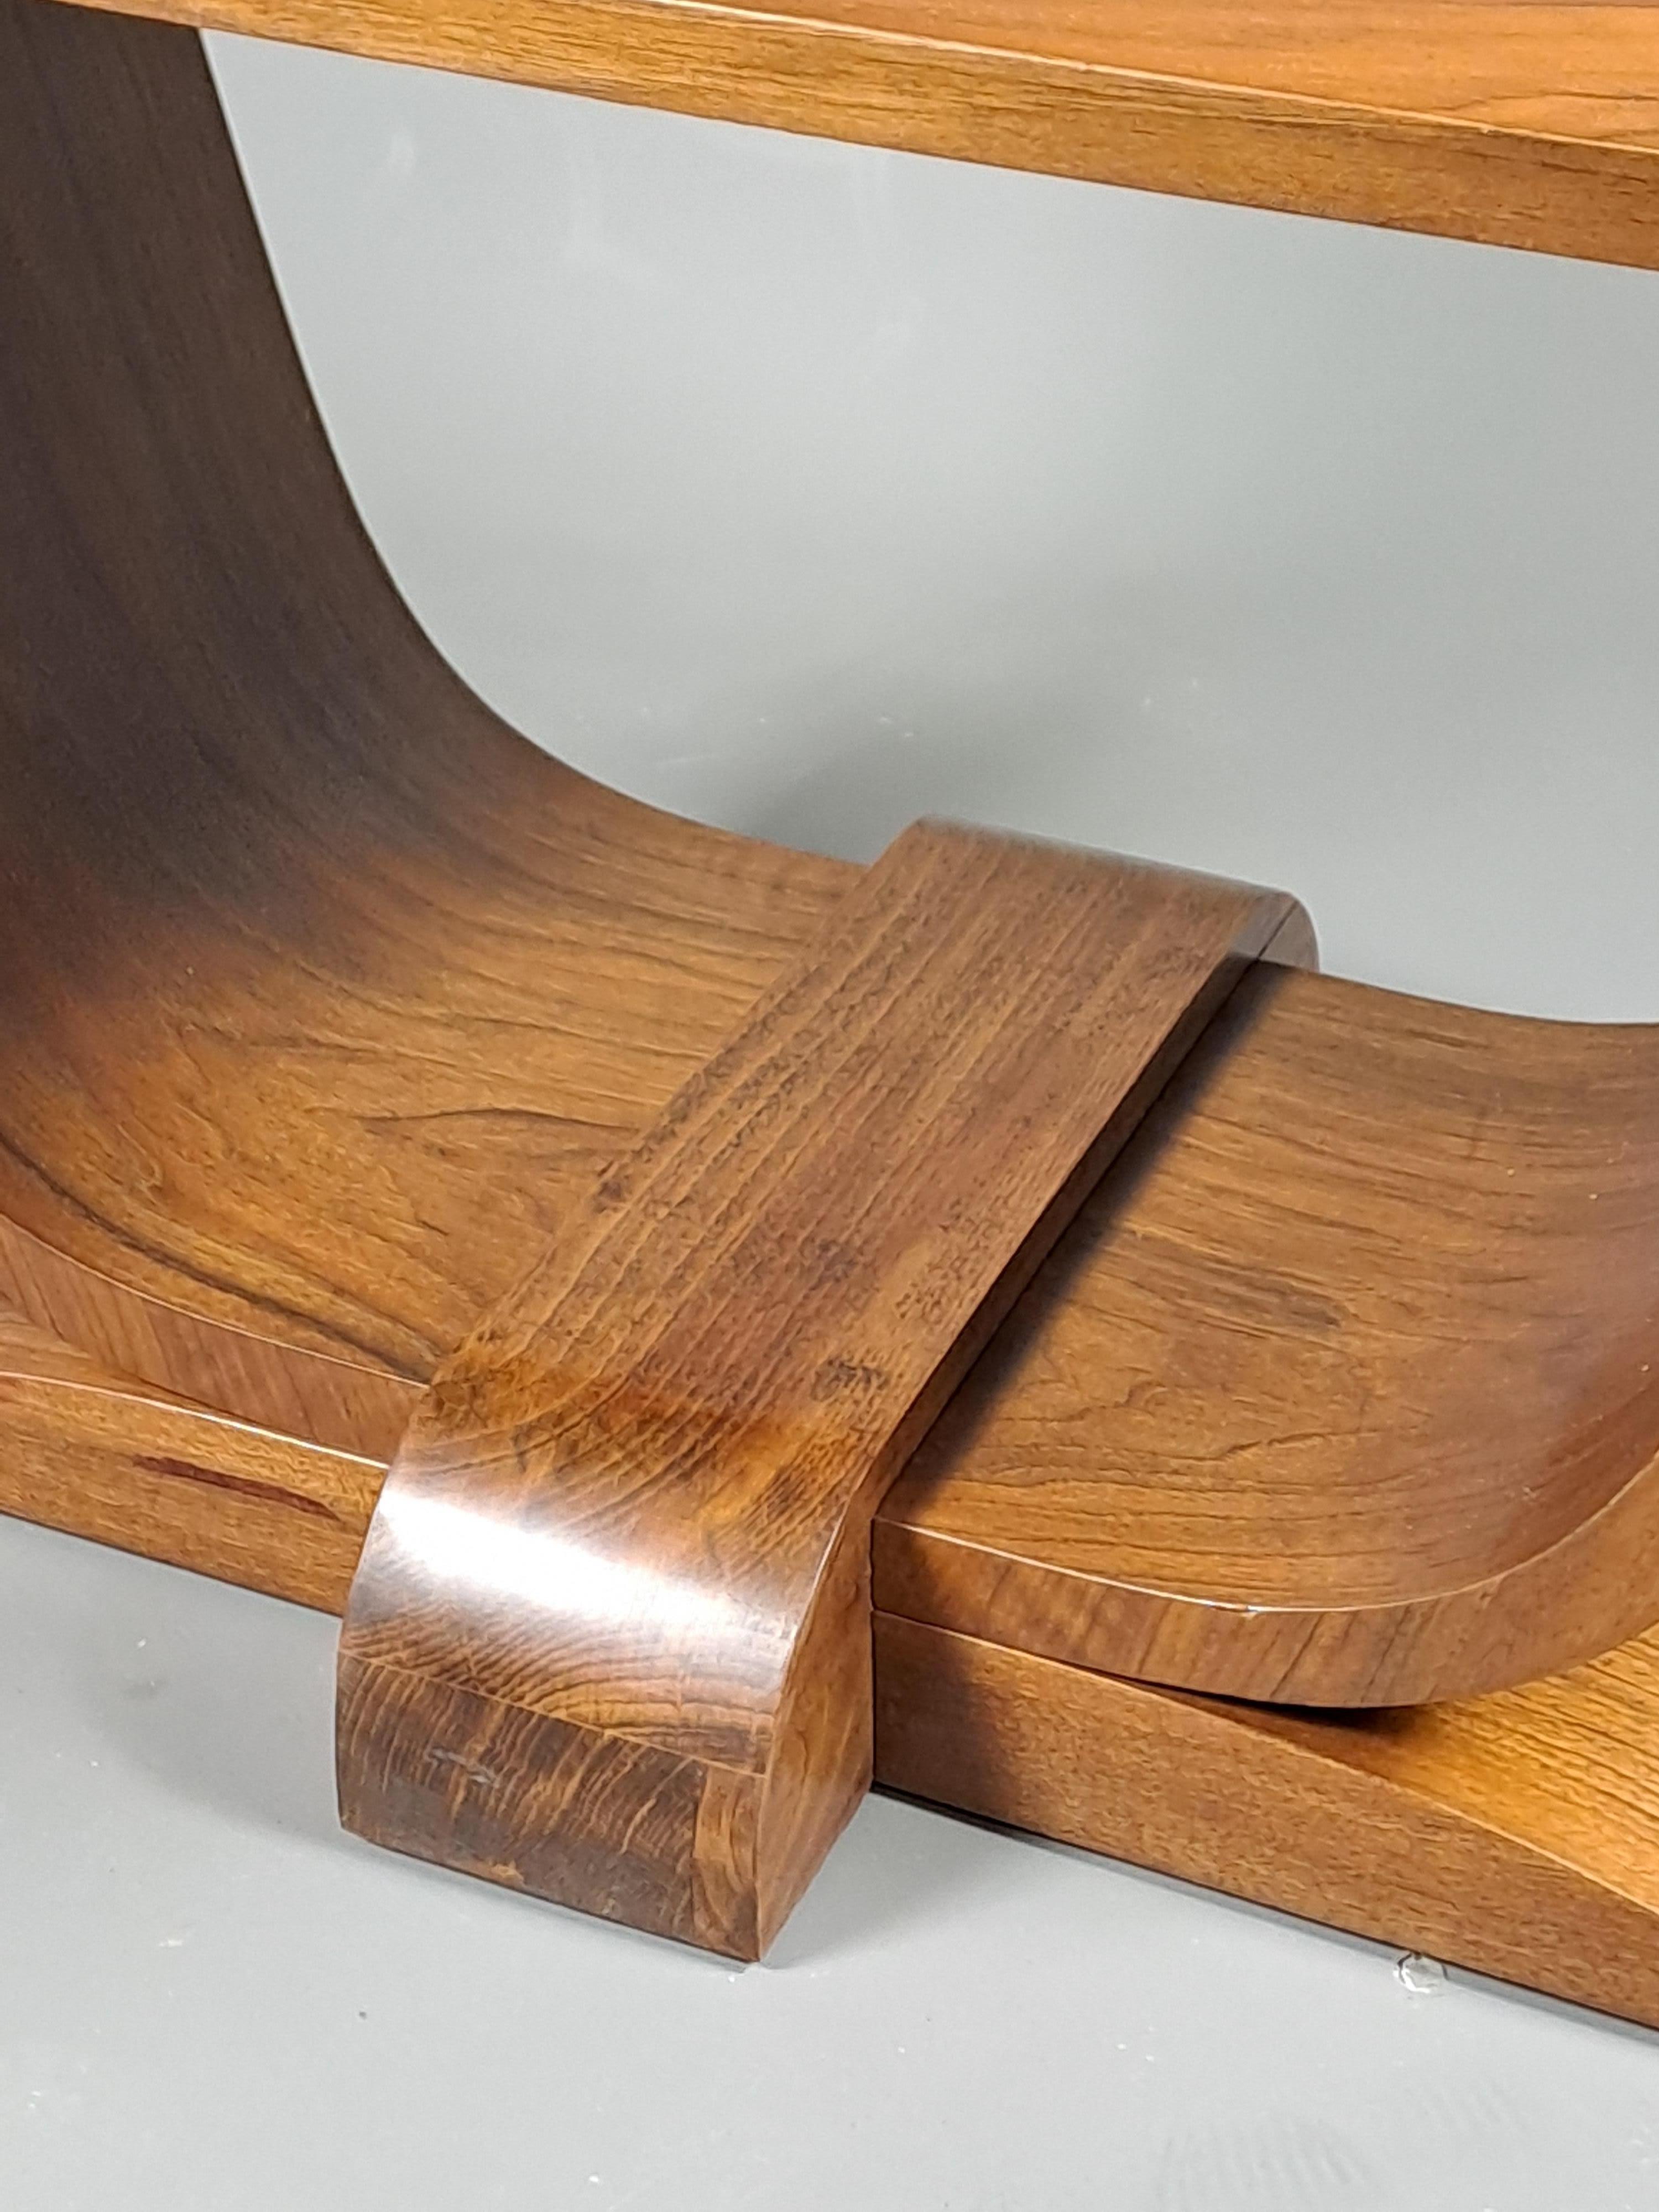 French Tulip-shaped Art Deco Living Room Table In Walnut Veneer For Sale